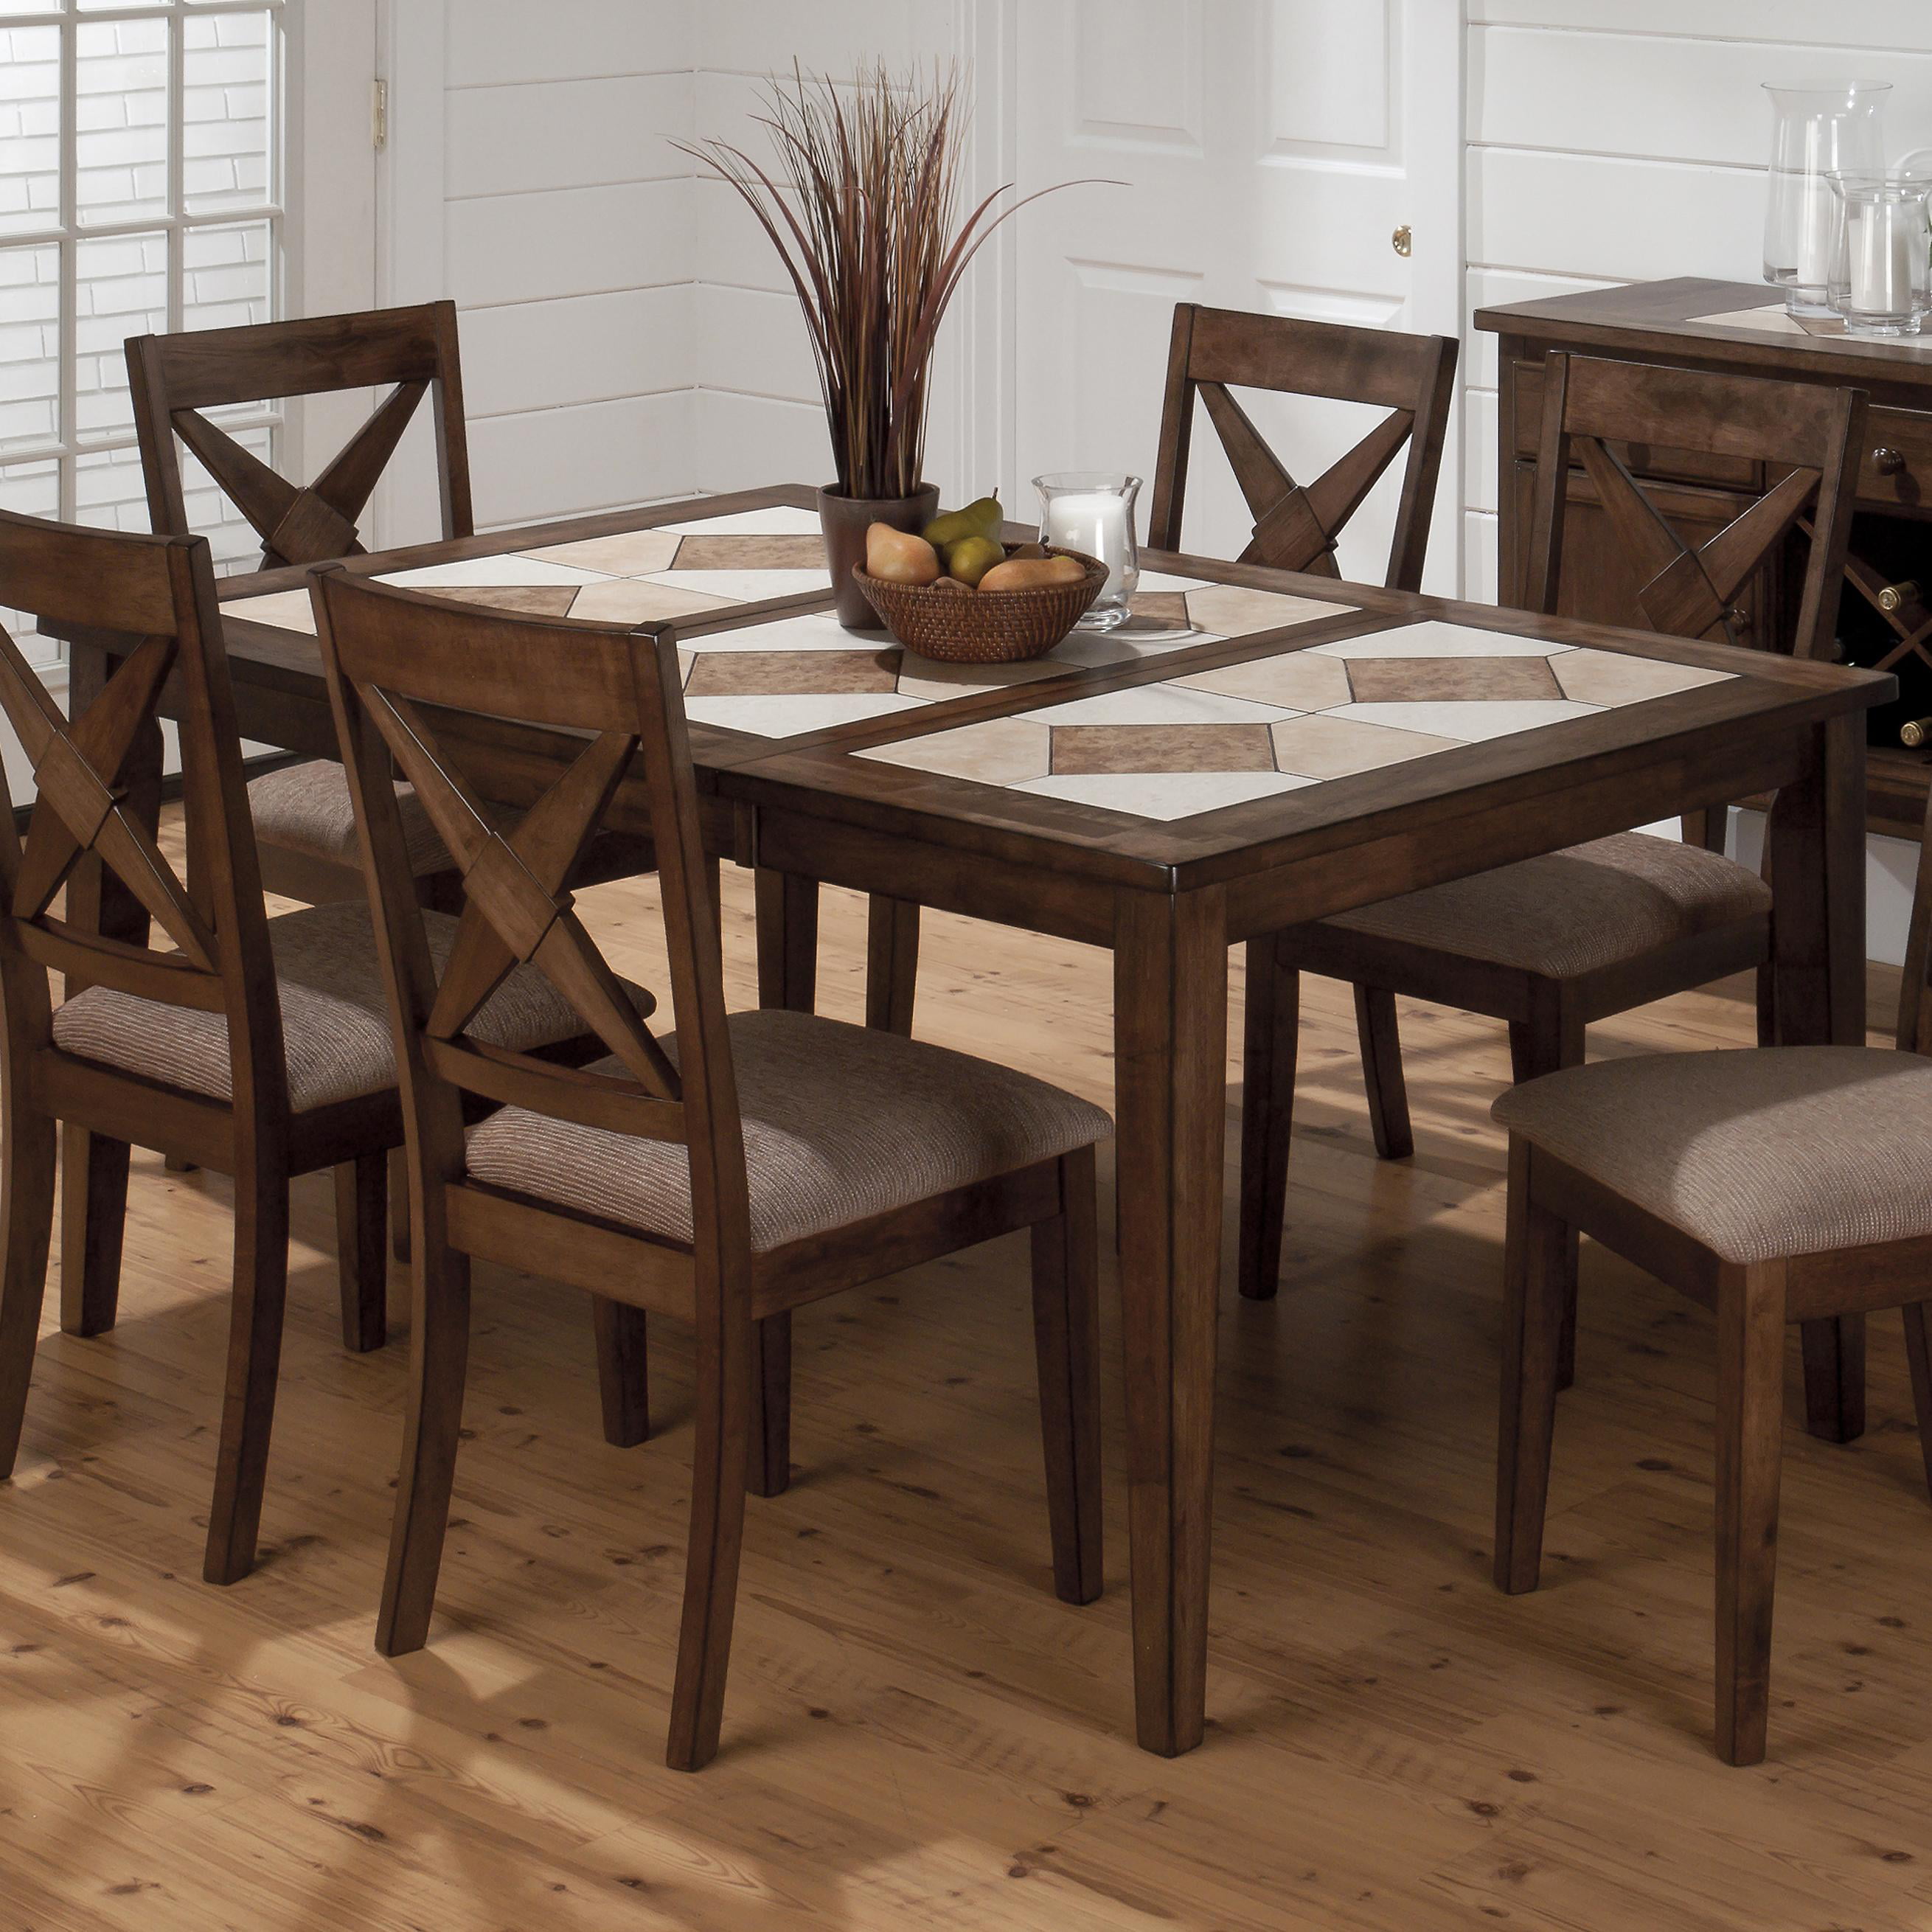 Tucson Dining Table With Ceramic Tile, Kitchen Table With Tile Top